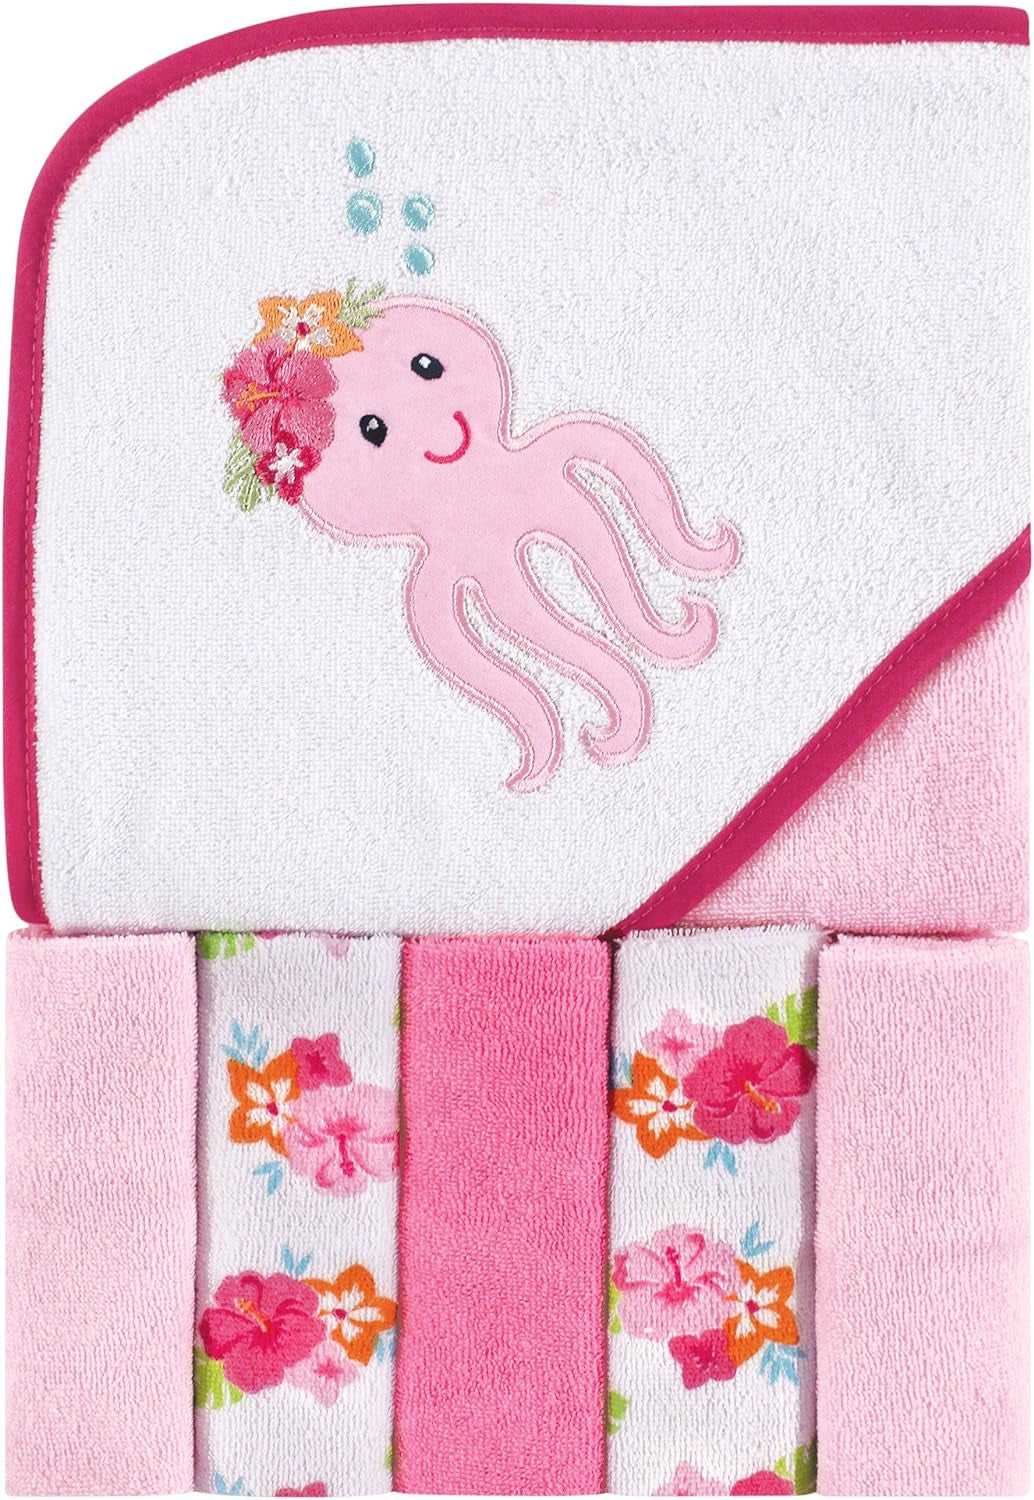 Unisex Baby Hooded Towel with Five Washcloths, Cotton,Polyester,Ikat Elephant, One Size